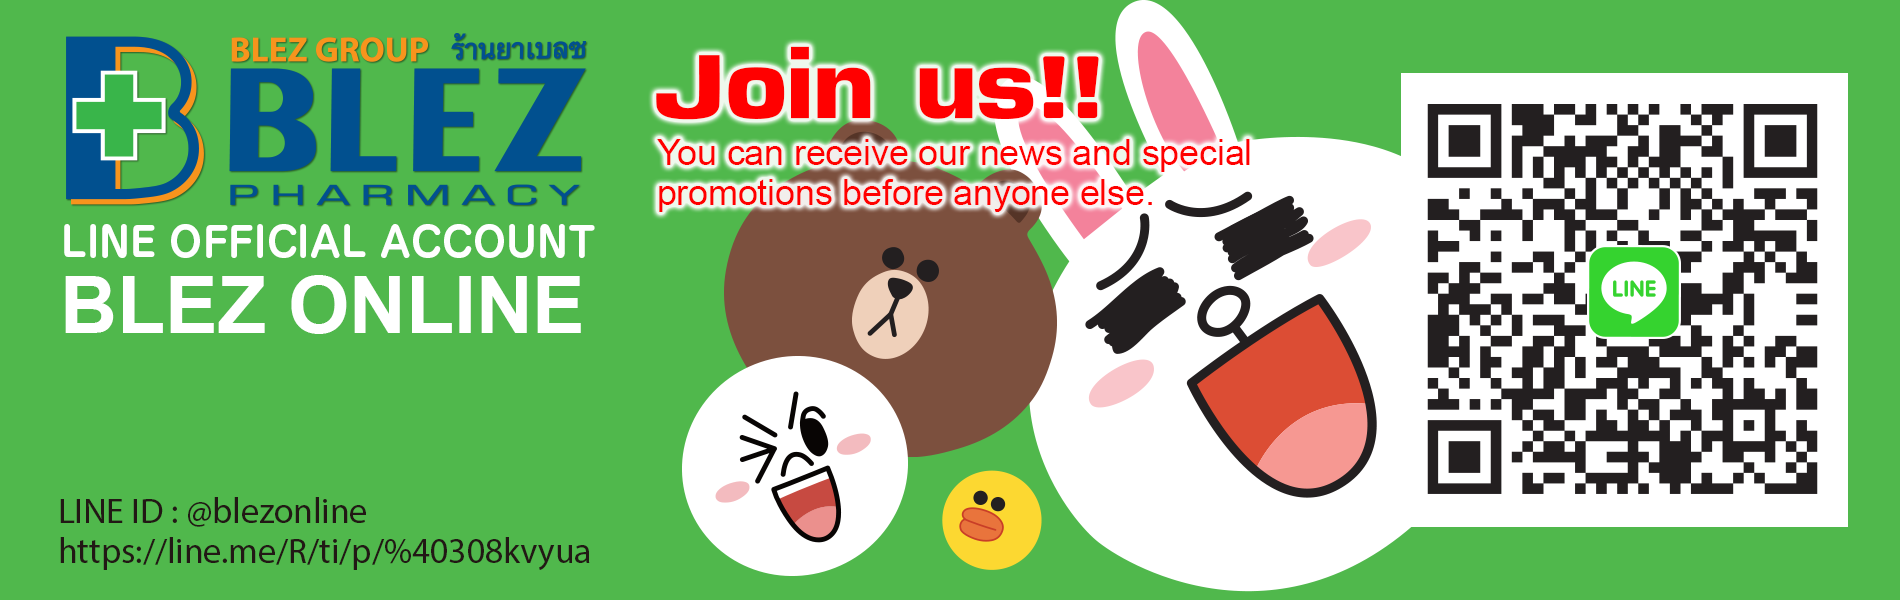 Join us as LINE's friend